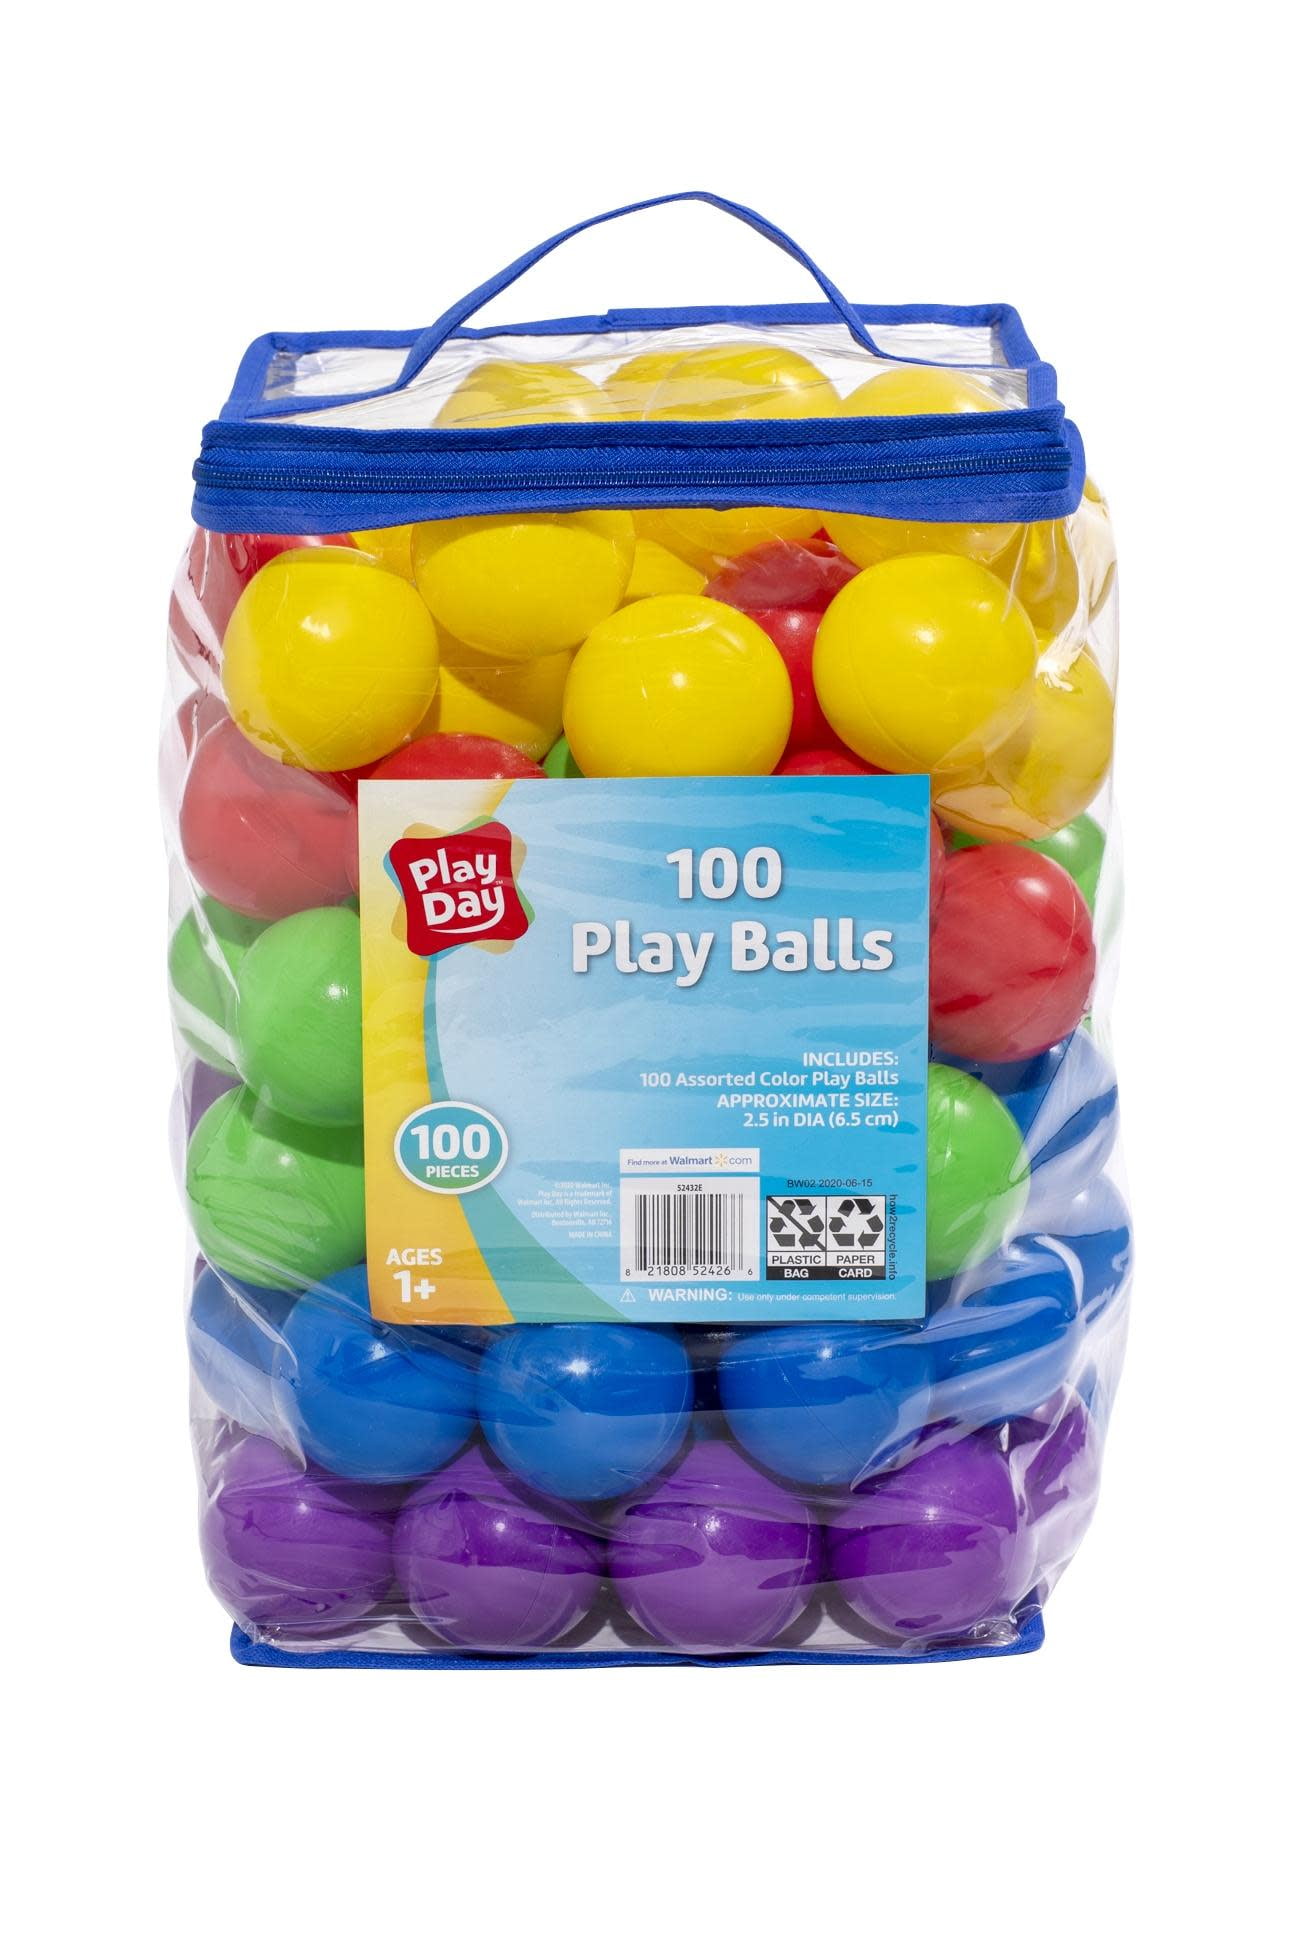 100 Multicolour Plastic Balls Toys Play Ball Pits Fun Indoor-Outdoor Family New 